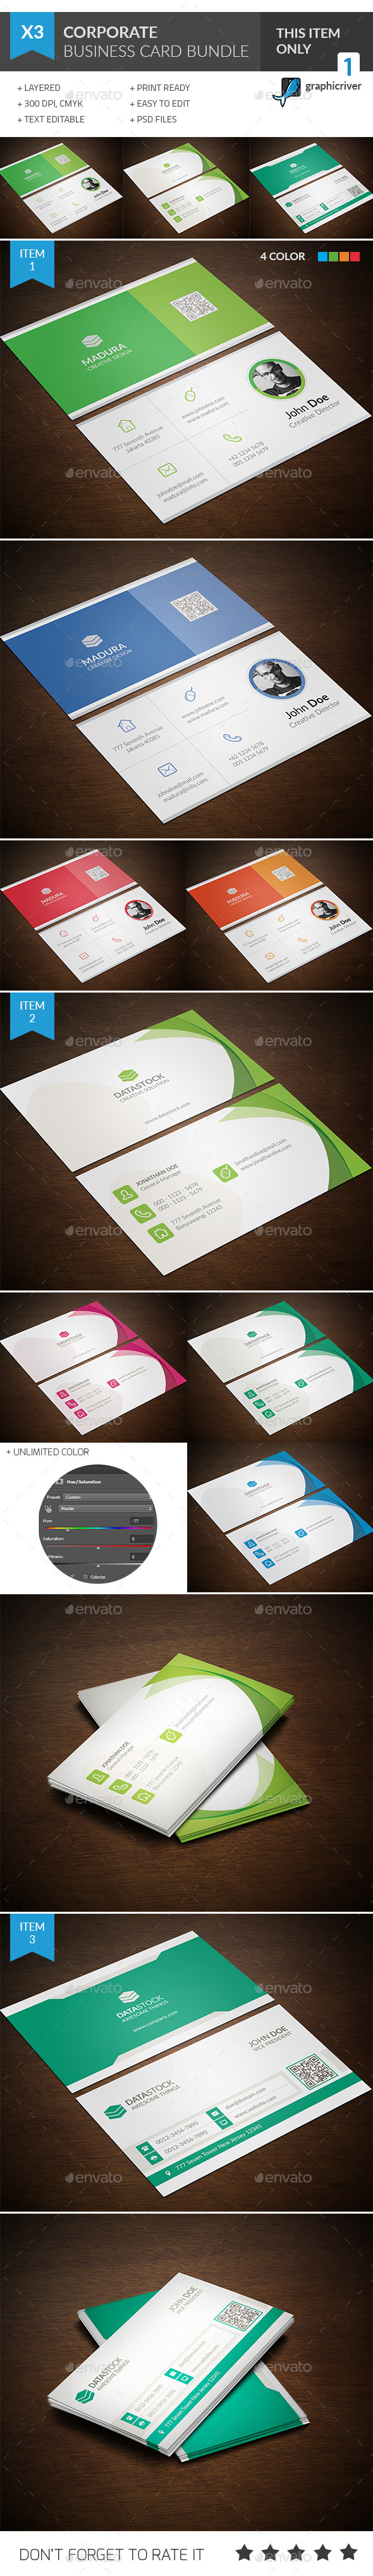 Business Card Bundle 3 in 1